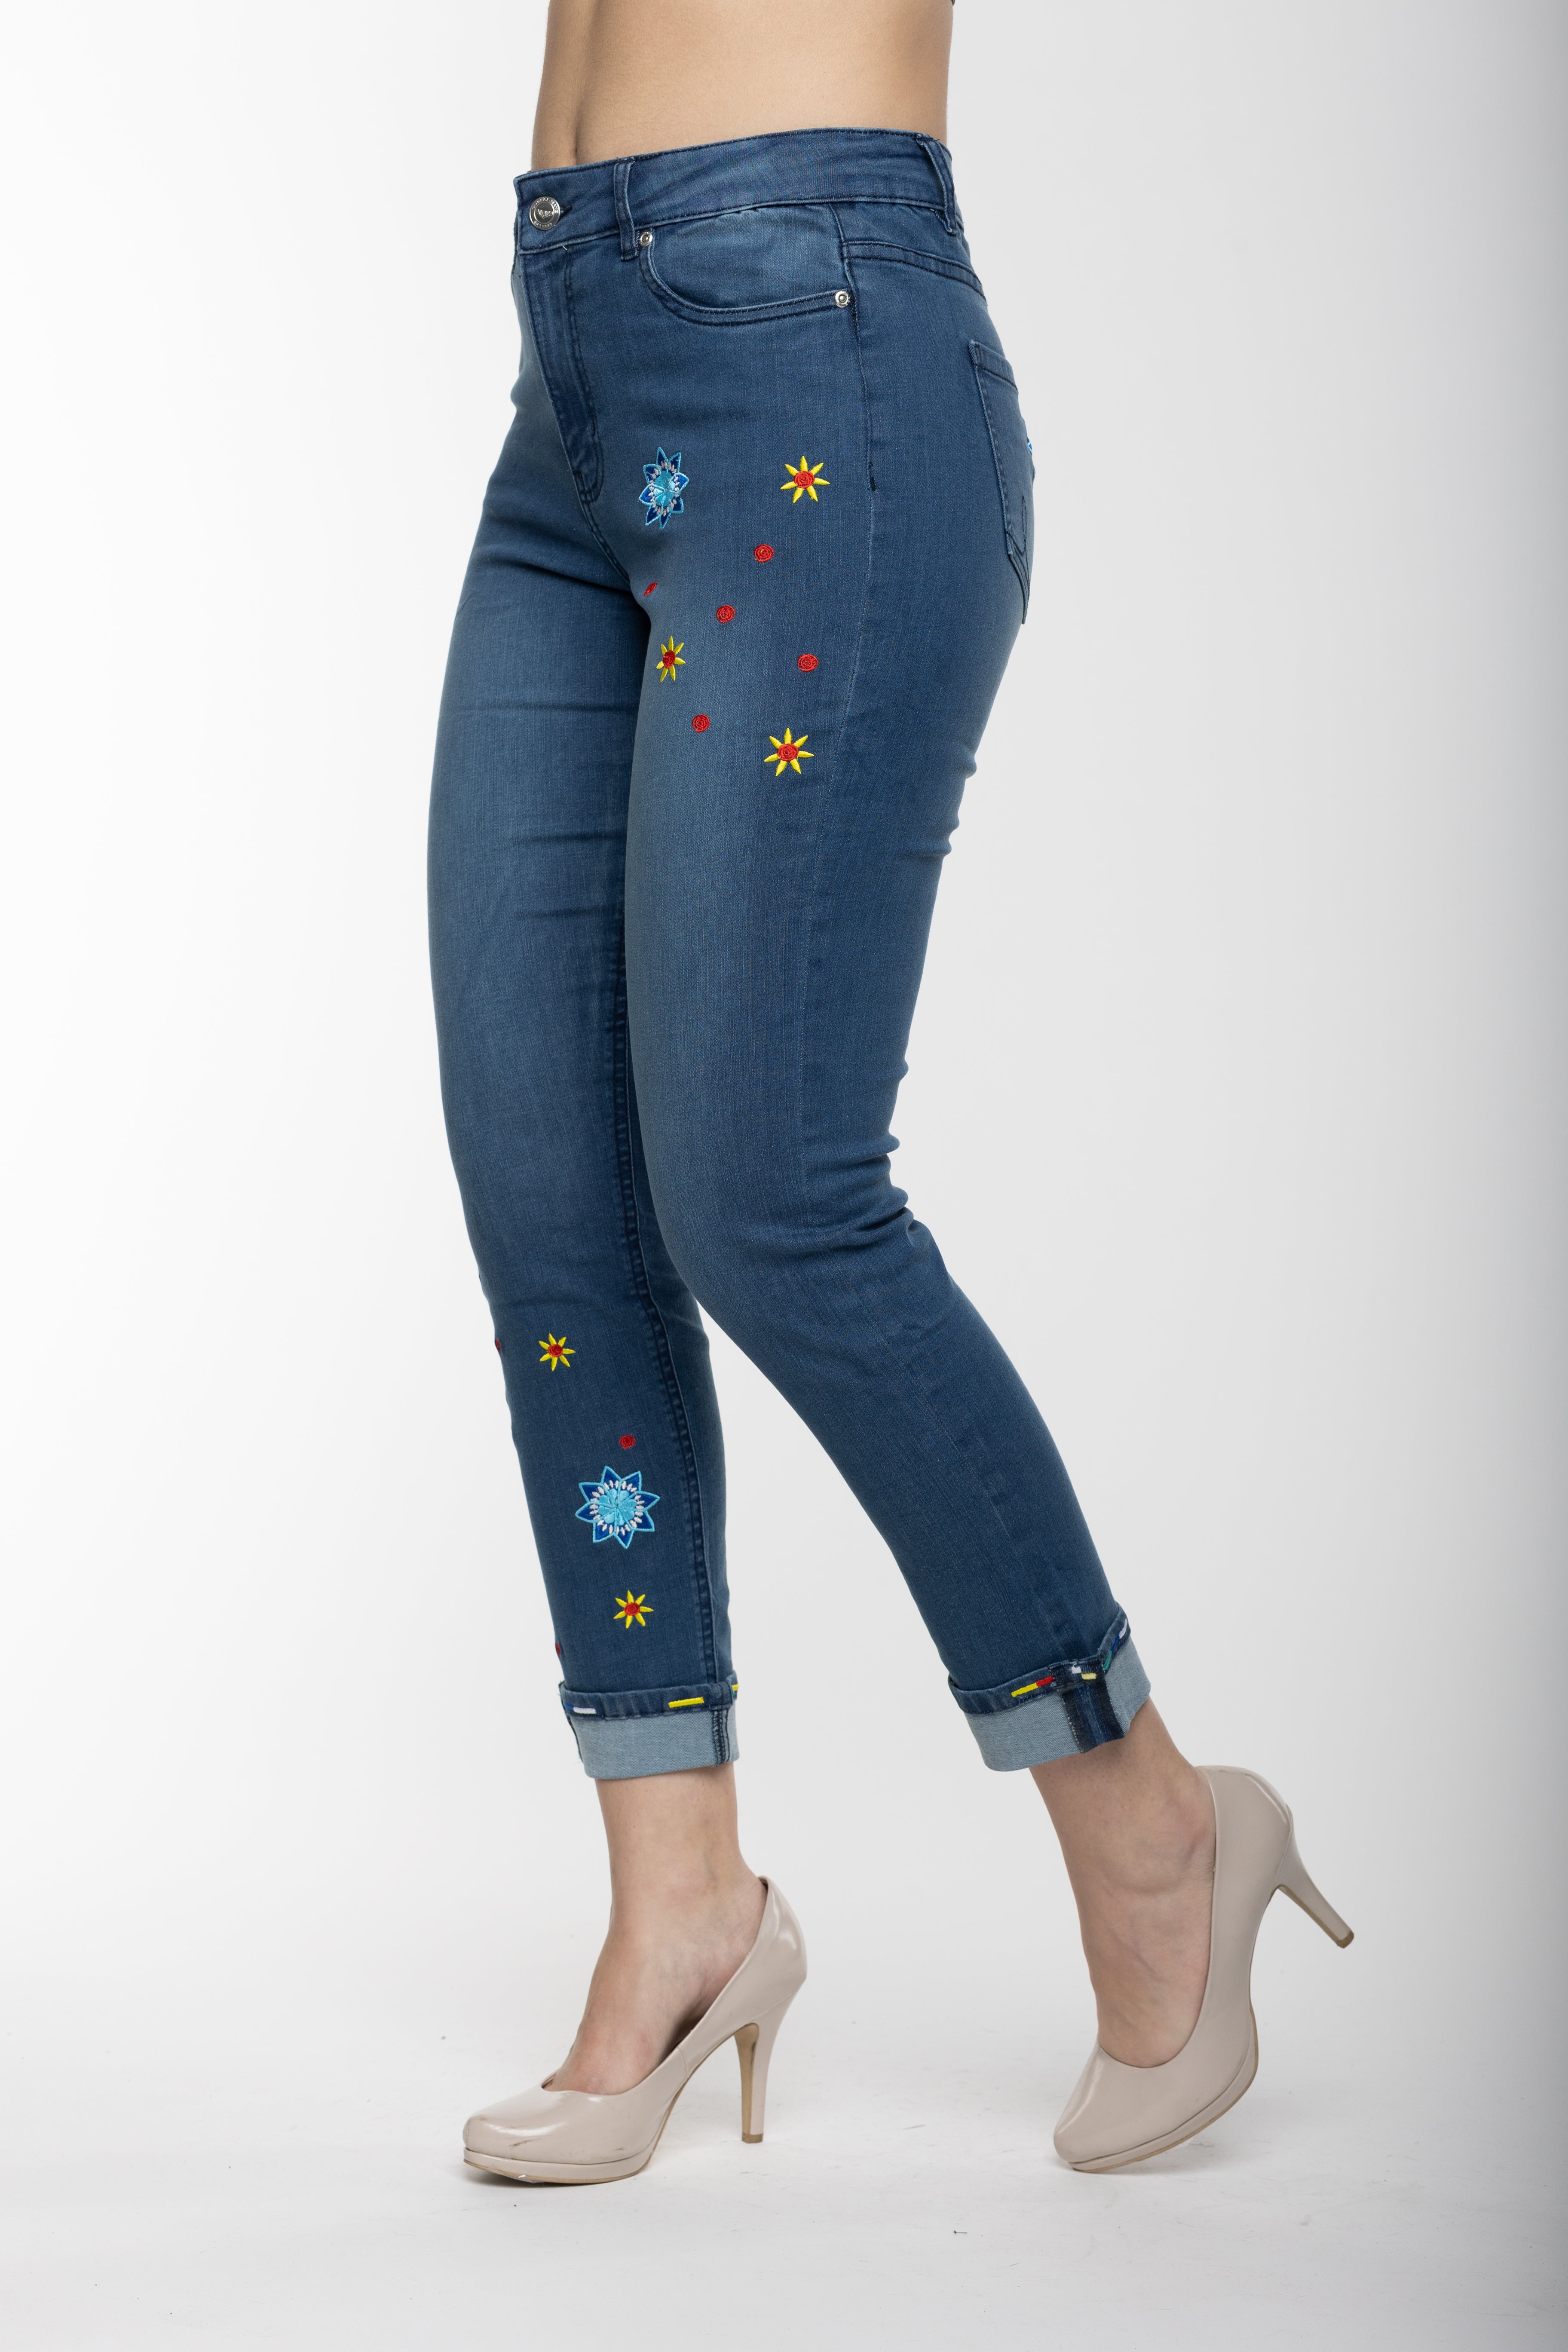 Carreli Jeans® | Angela Fit Boyfriend with Embroideries in Blue Stone Wash